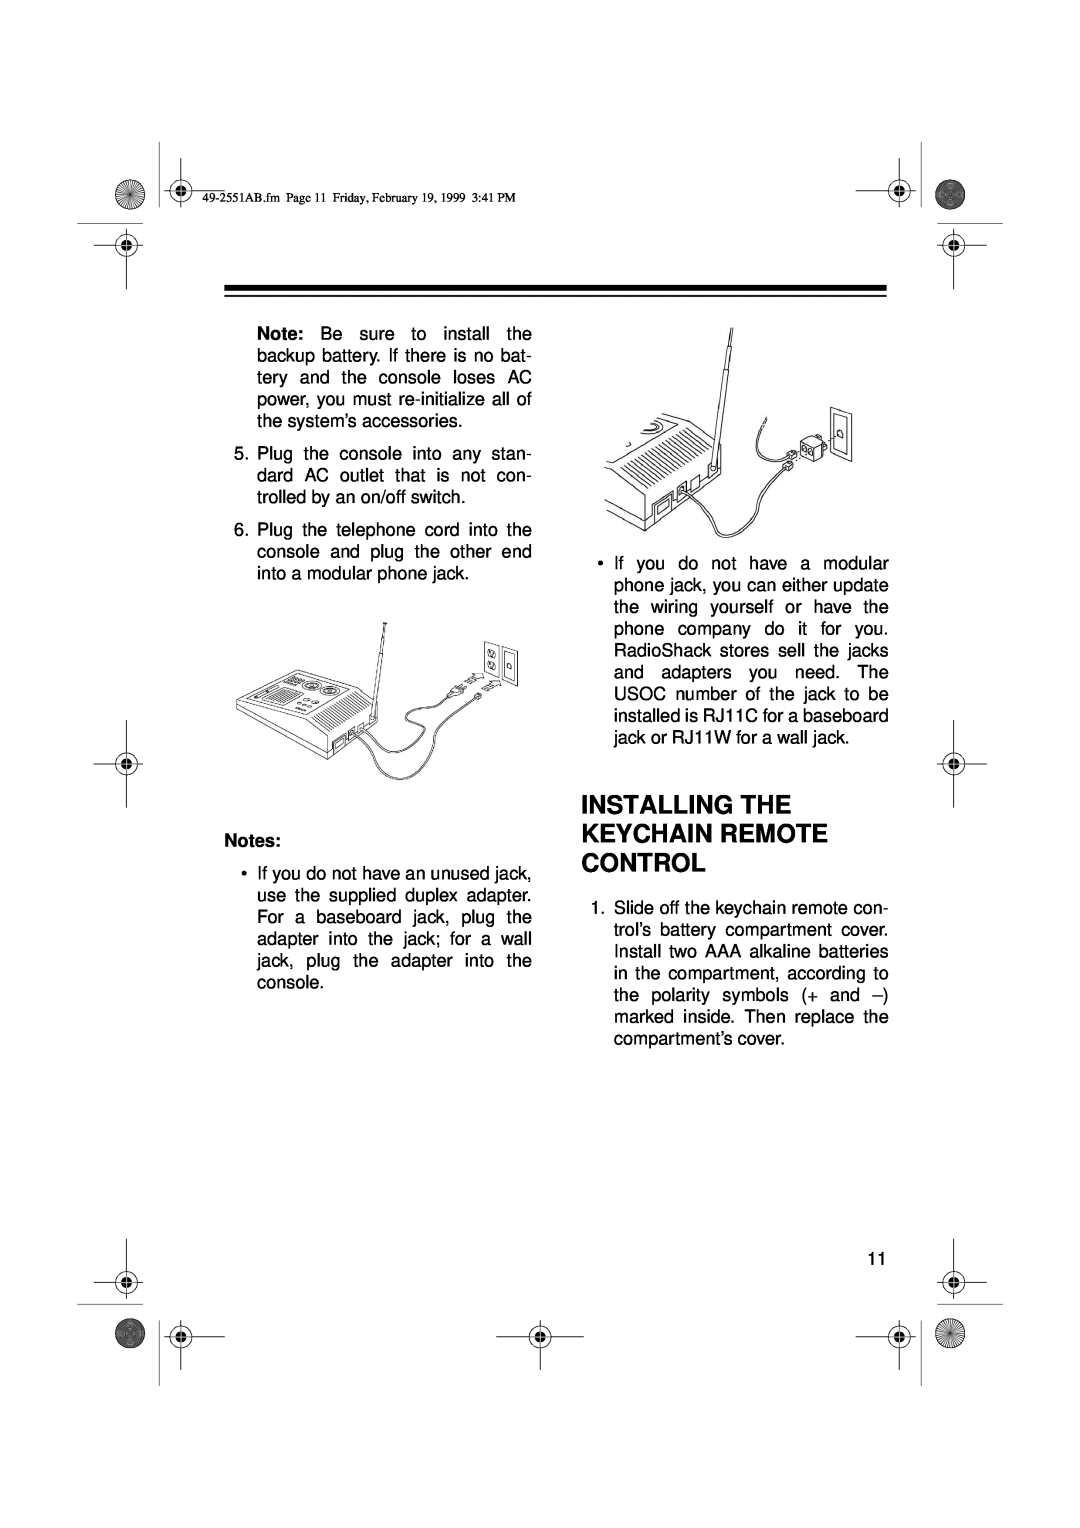 Radio Shack 49-2551A owner manual Installing The Keychain Remote Control 